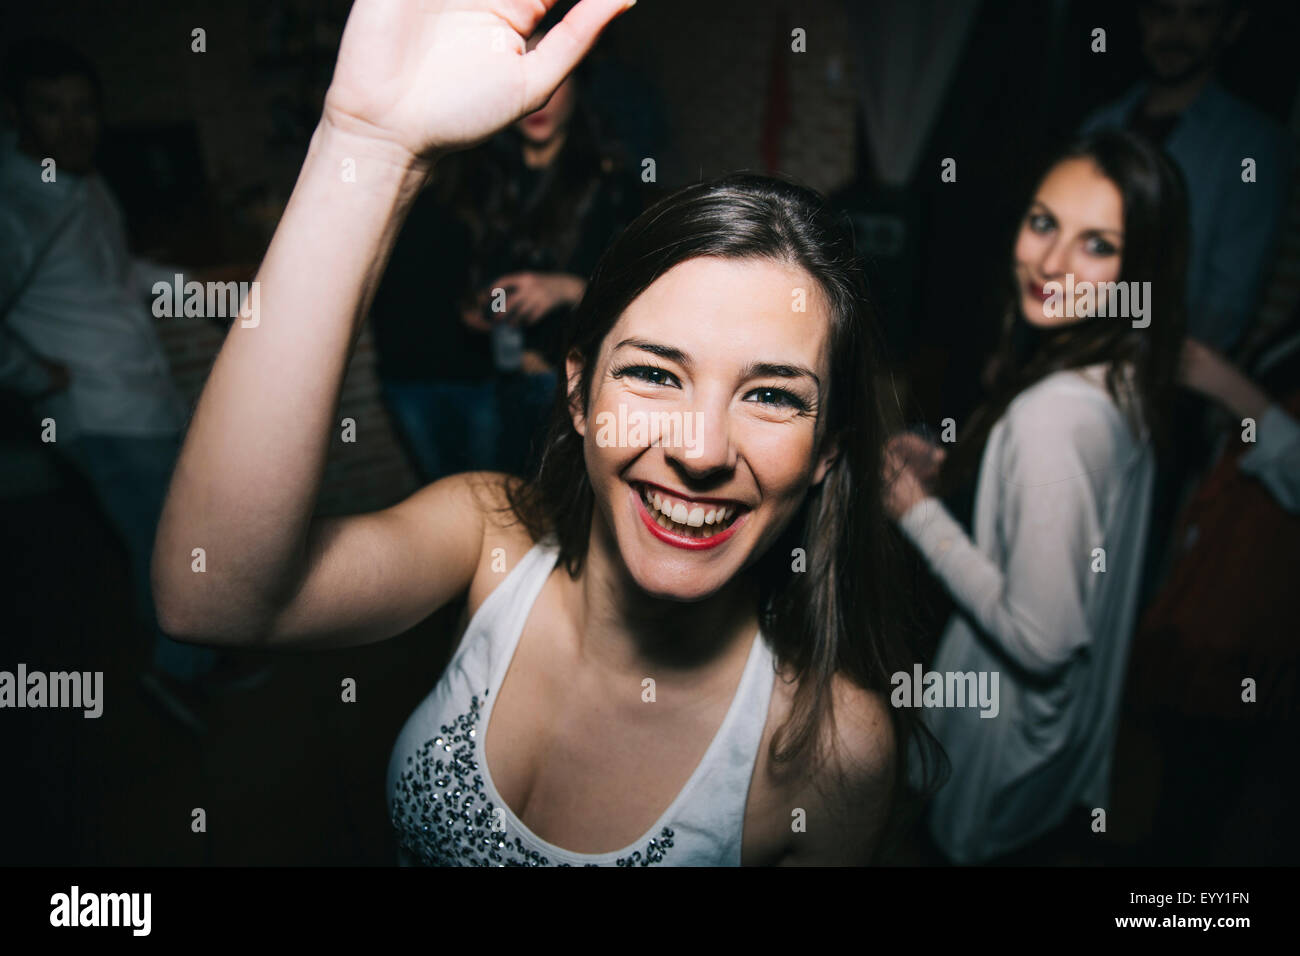 Smiling woman waving in nightclub Banque D'Images